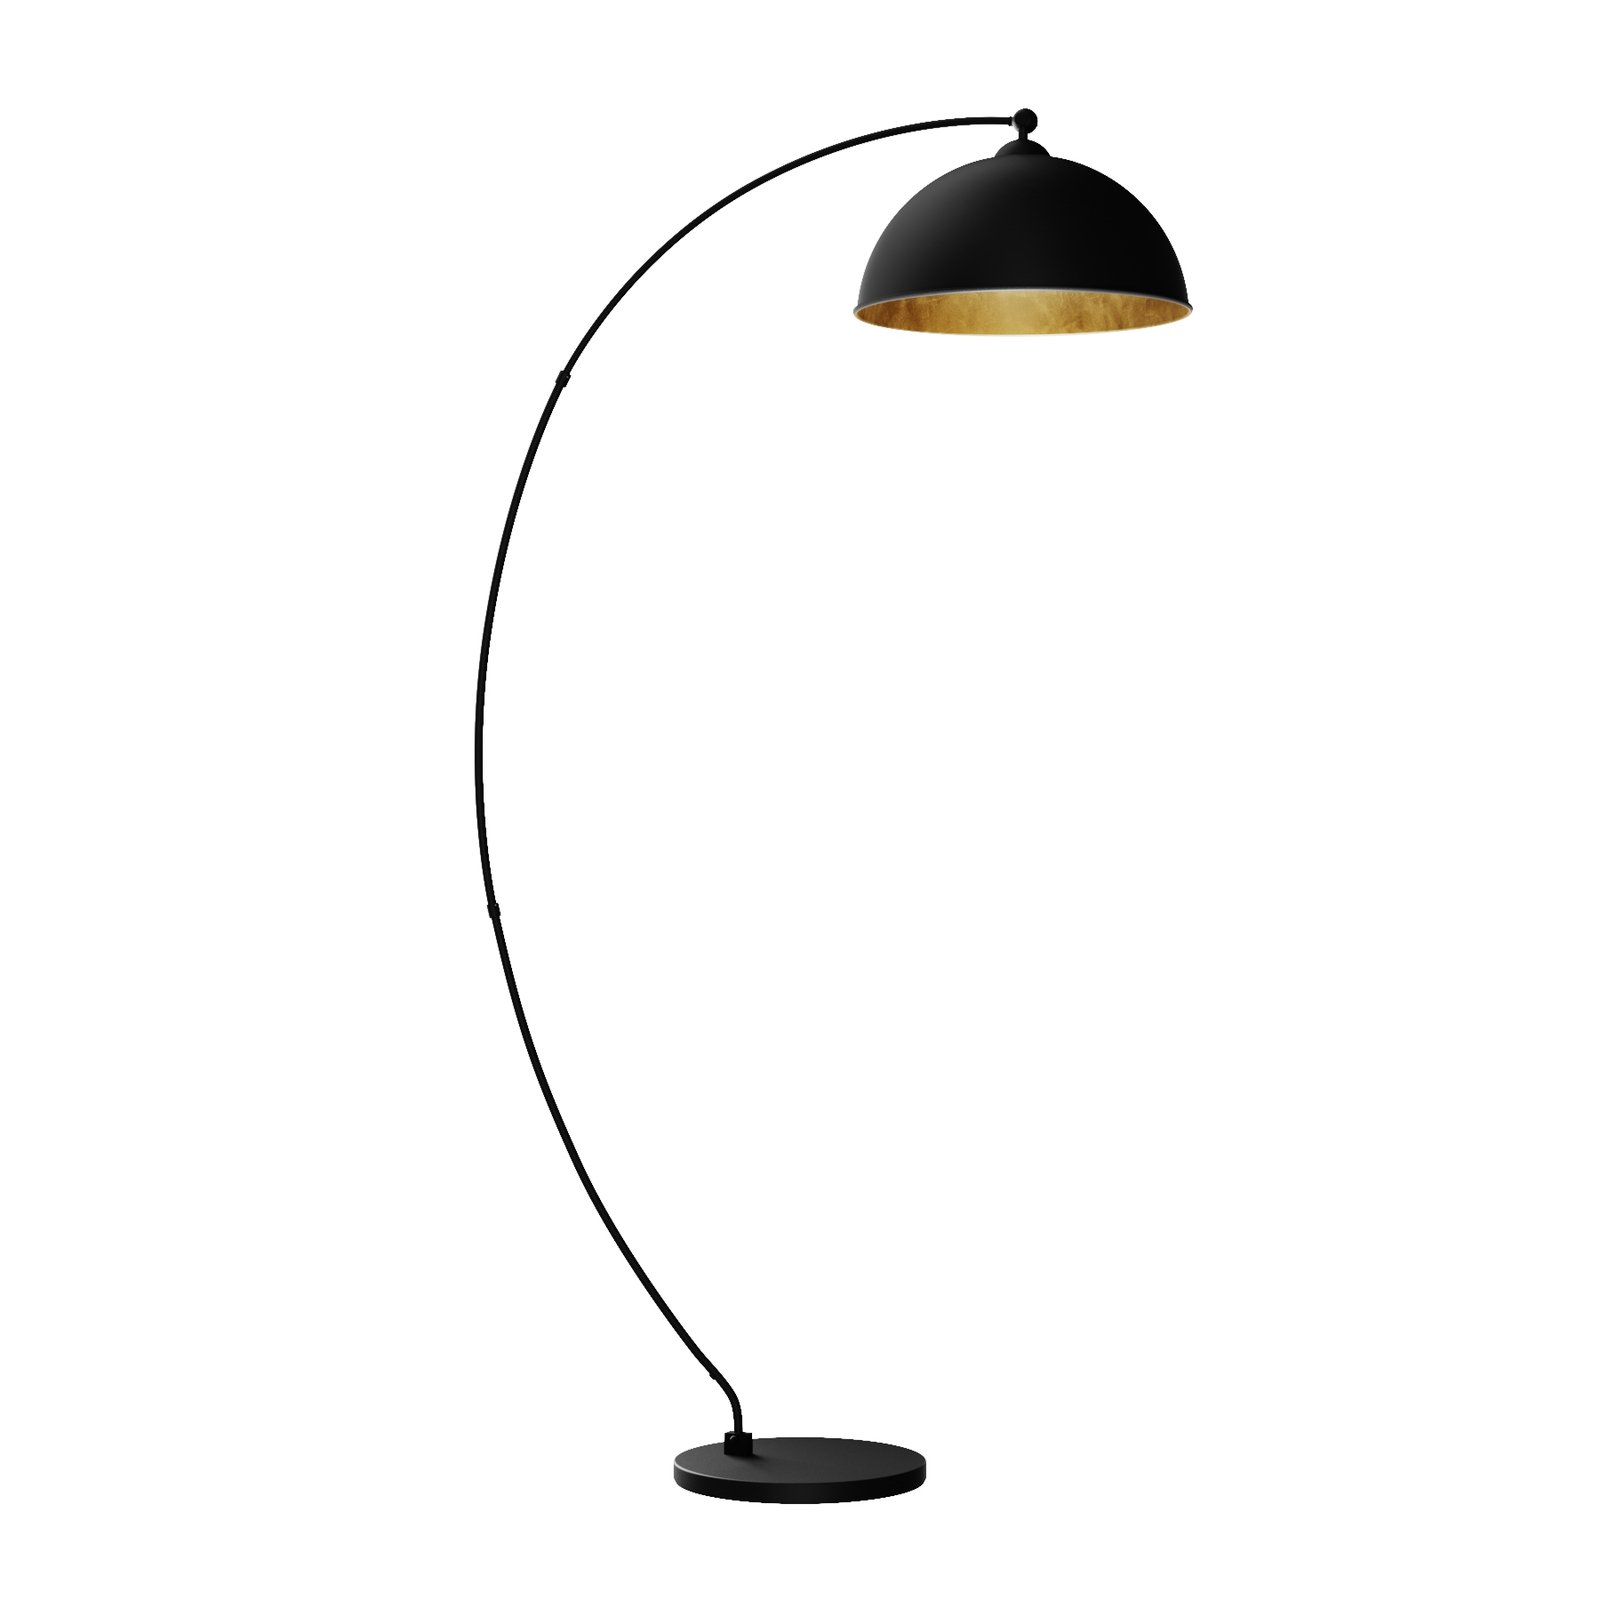 Curved Floor Lamp Jonera Black And, Gold Arched Floor Lamp Uk